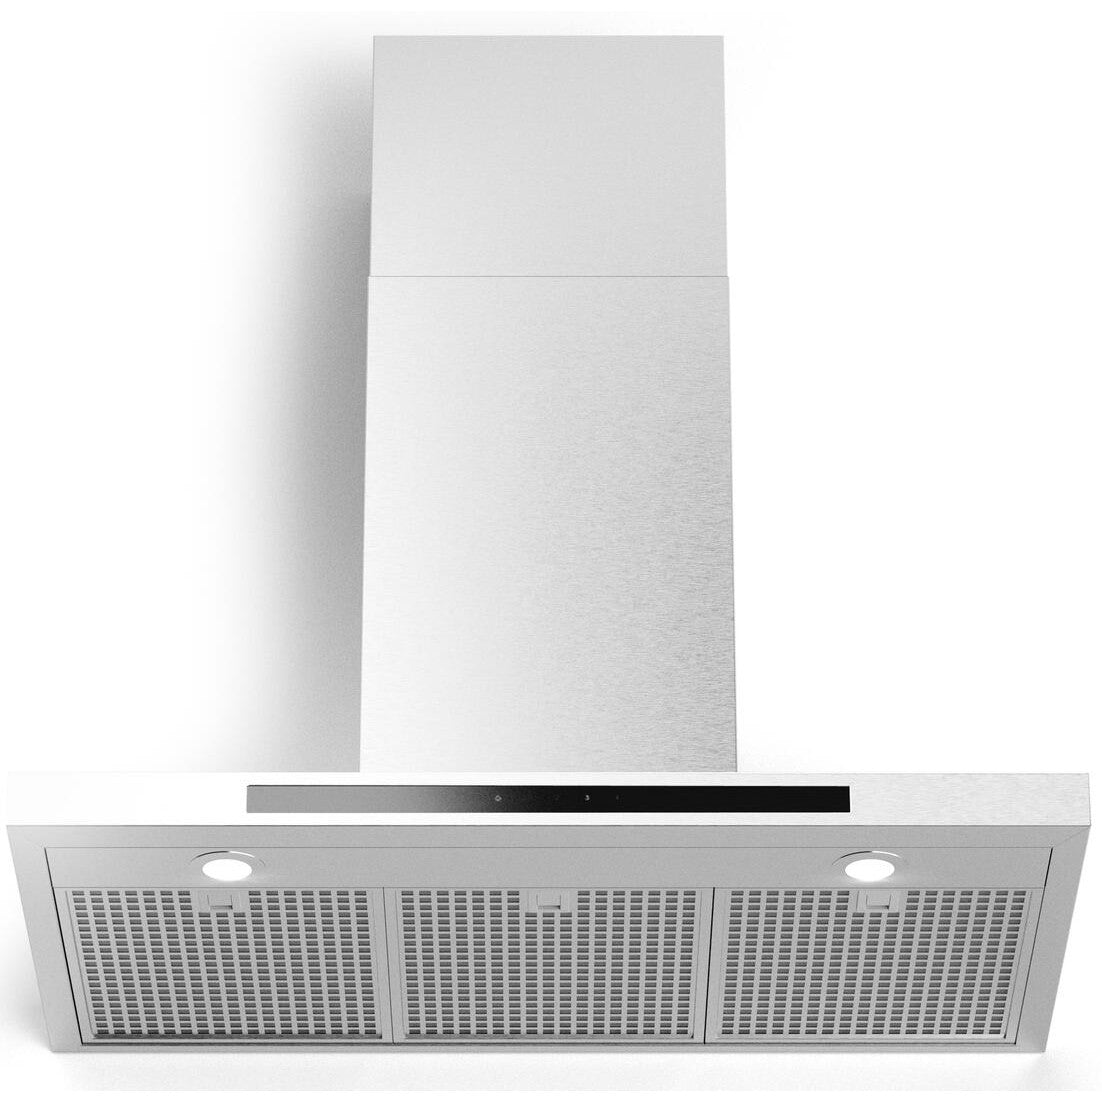 Forte Alberto 36" 600 CFM Convertible Residential Round Duct Stainless Steel Wall Mount Range Hood With Chimney Extension, Recirculating Kit, Charcoal Filters, and LED Lighting